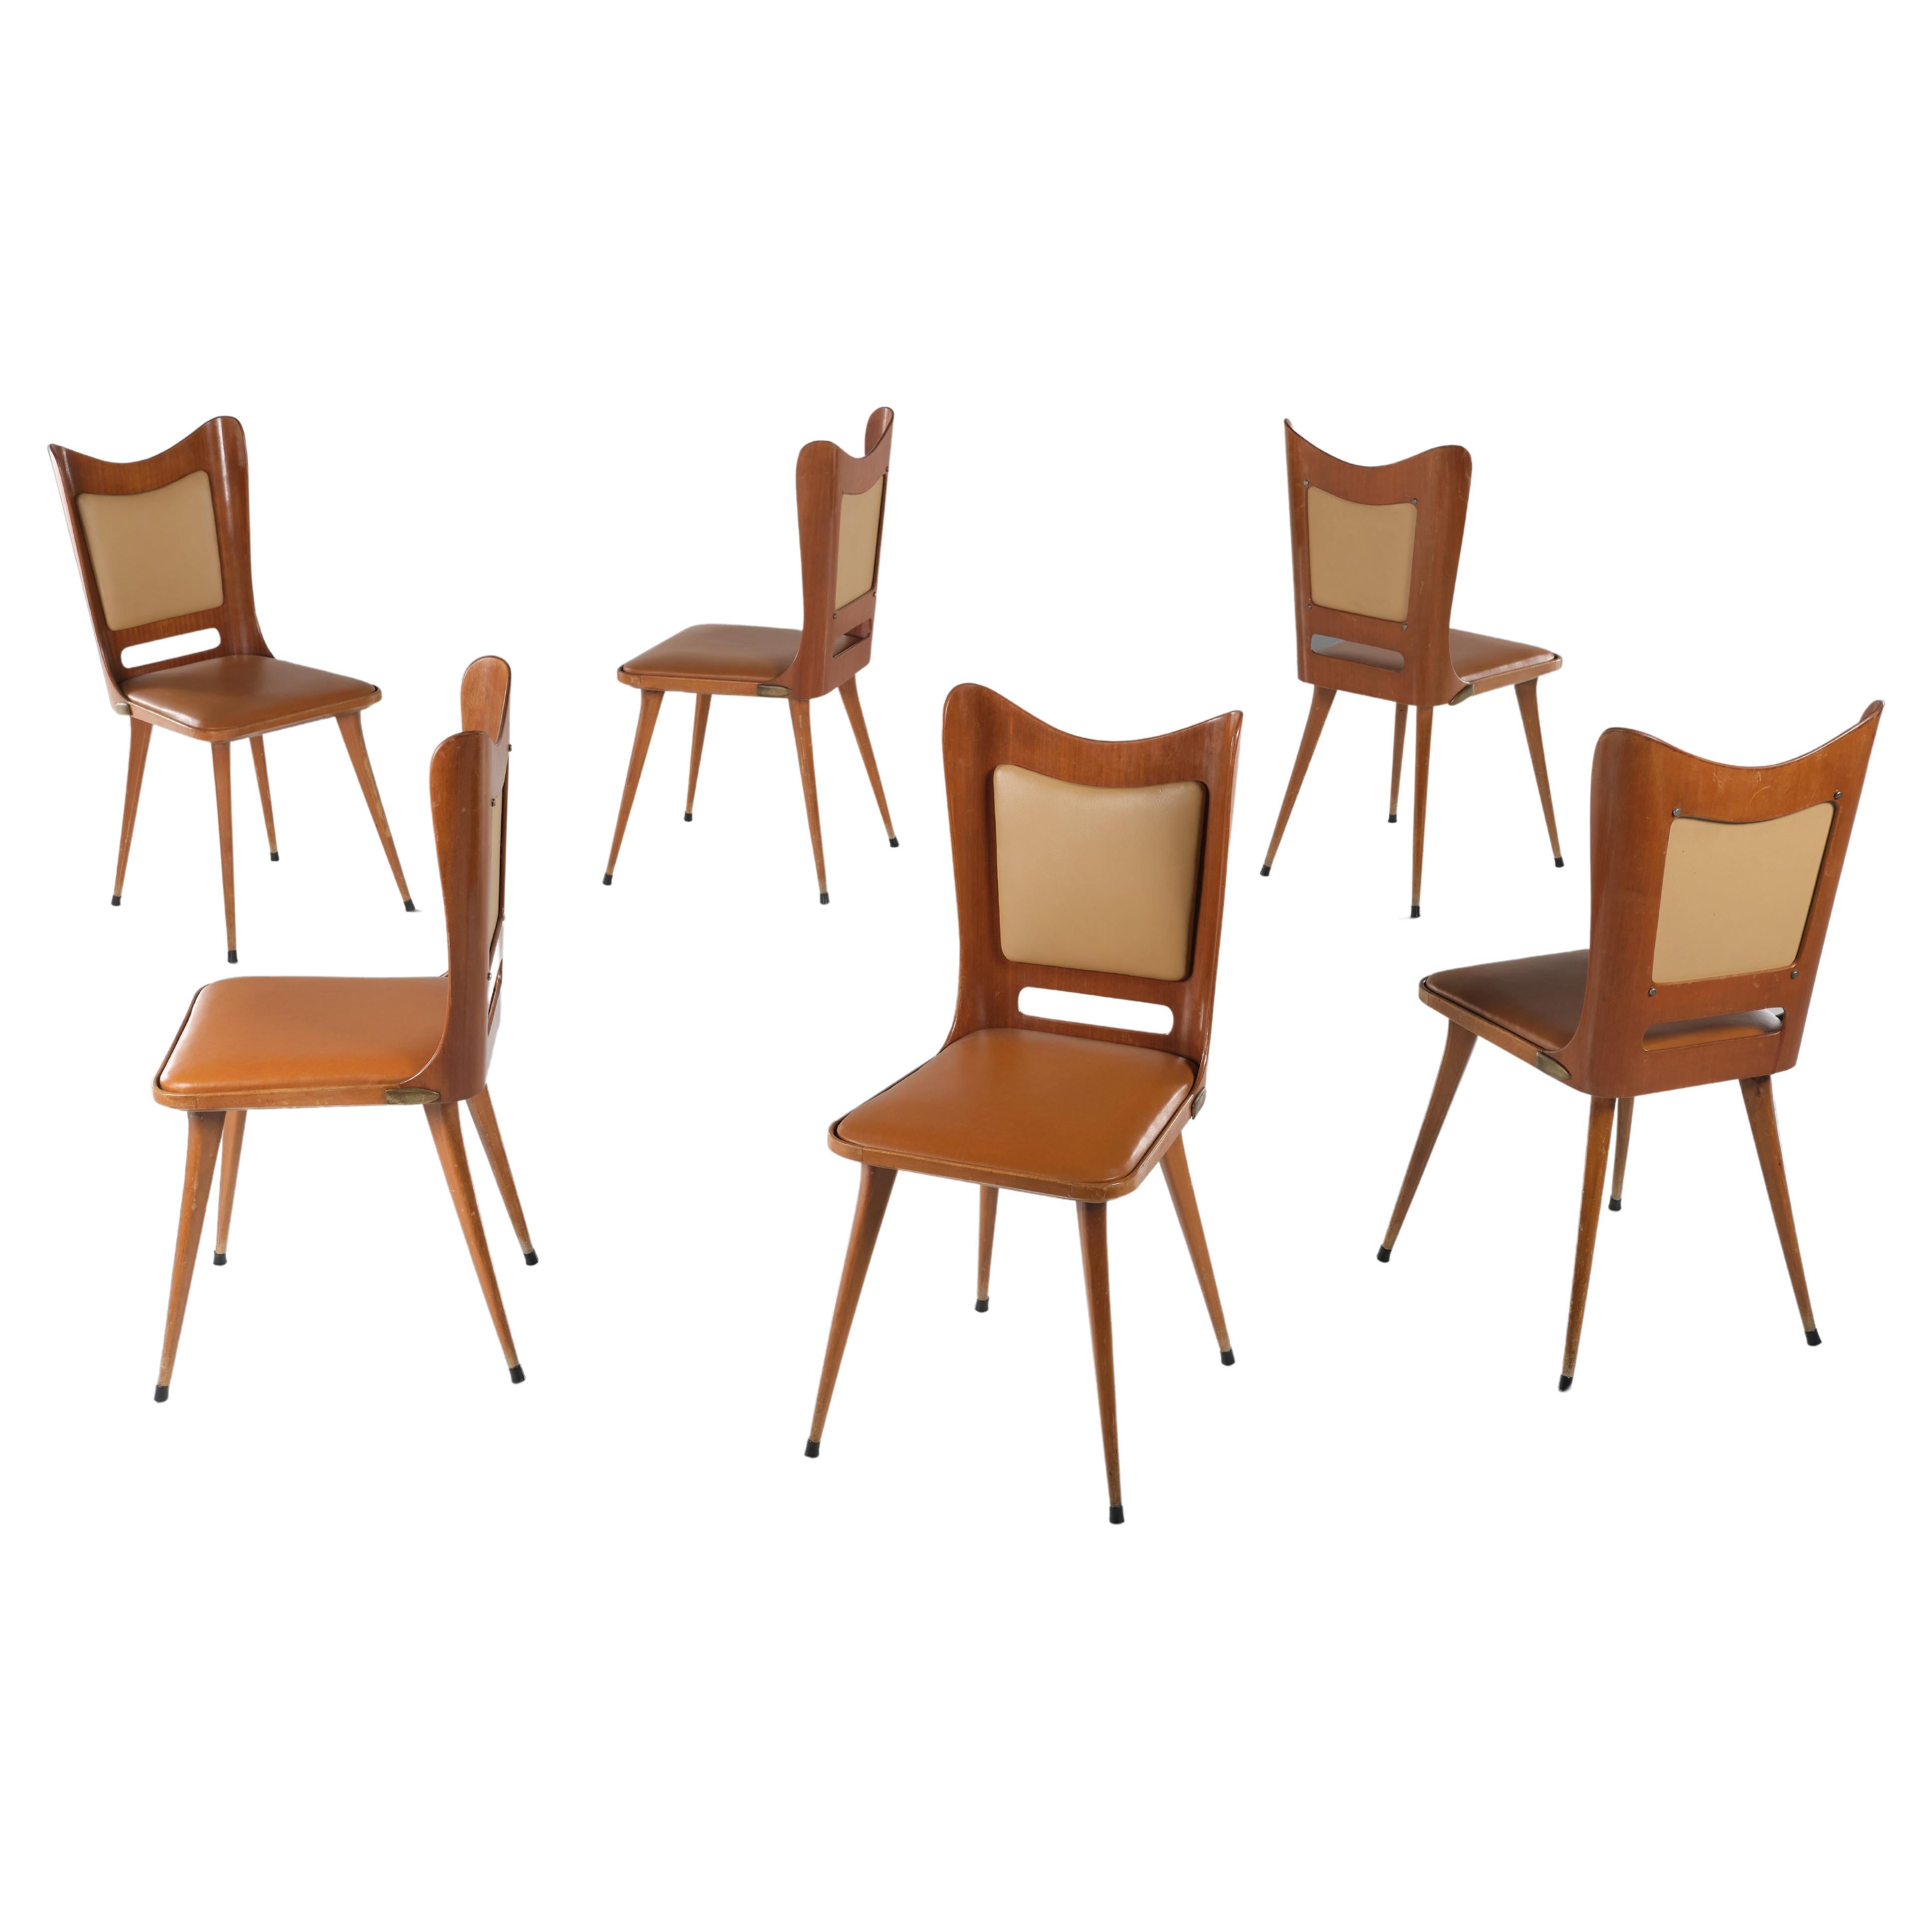 Carlo Ratti Set of 6 Chairs Wood Plywood and Faux Leather, Italian Design 1950s